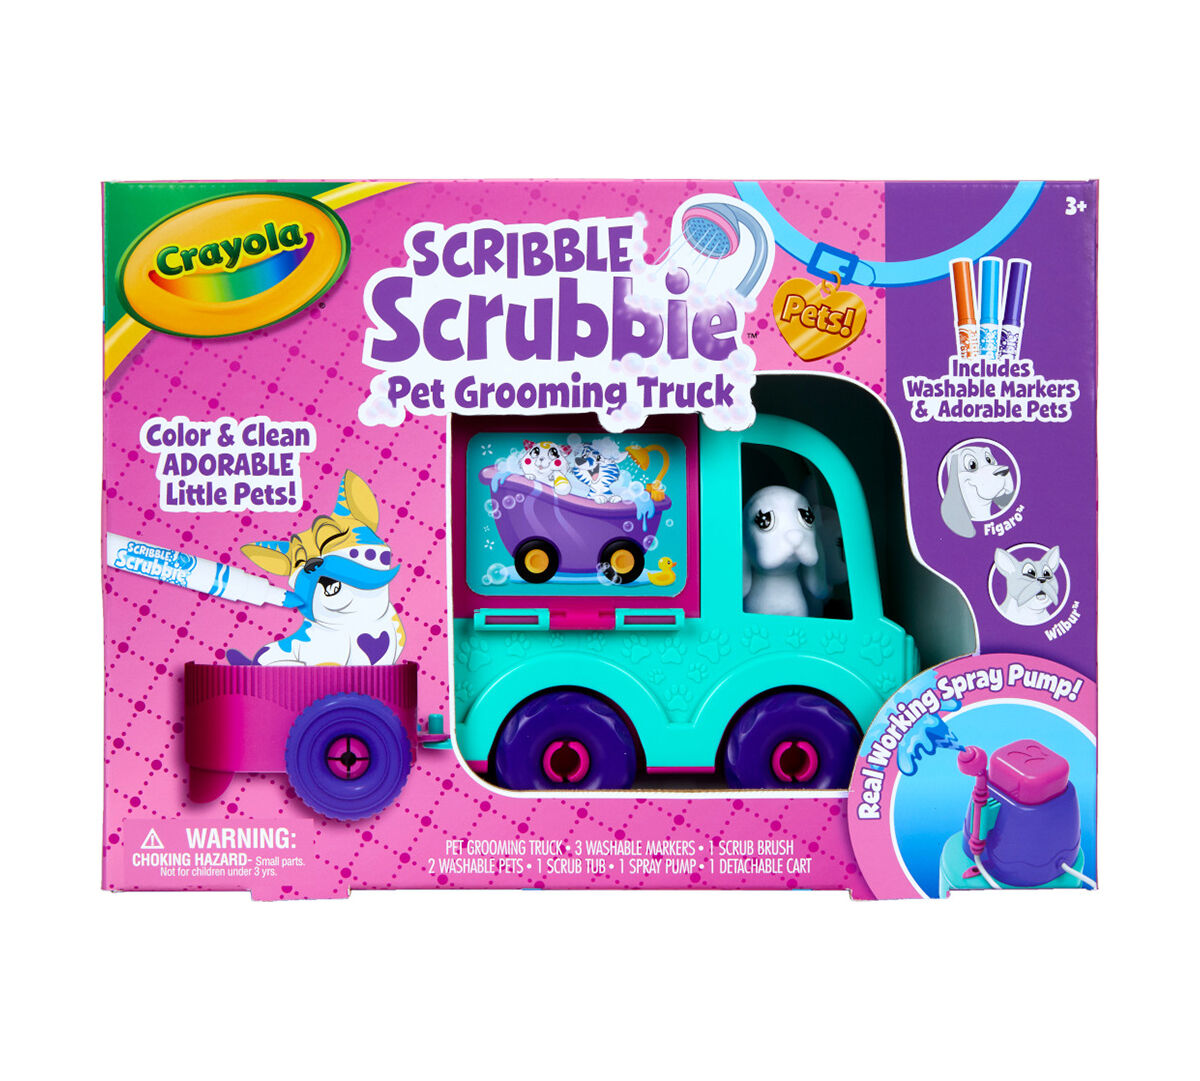 Age 3 5 Toy Pet Playset 4 Crayola Scribble Scrubbie Pets Grooming Truck 6 Gift for Kids 